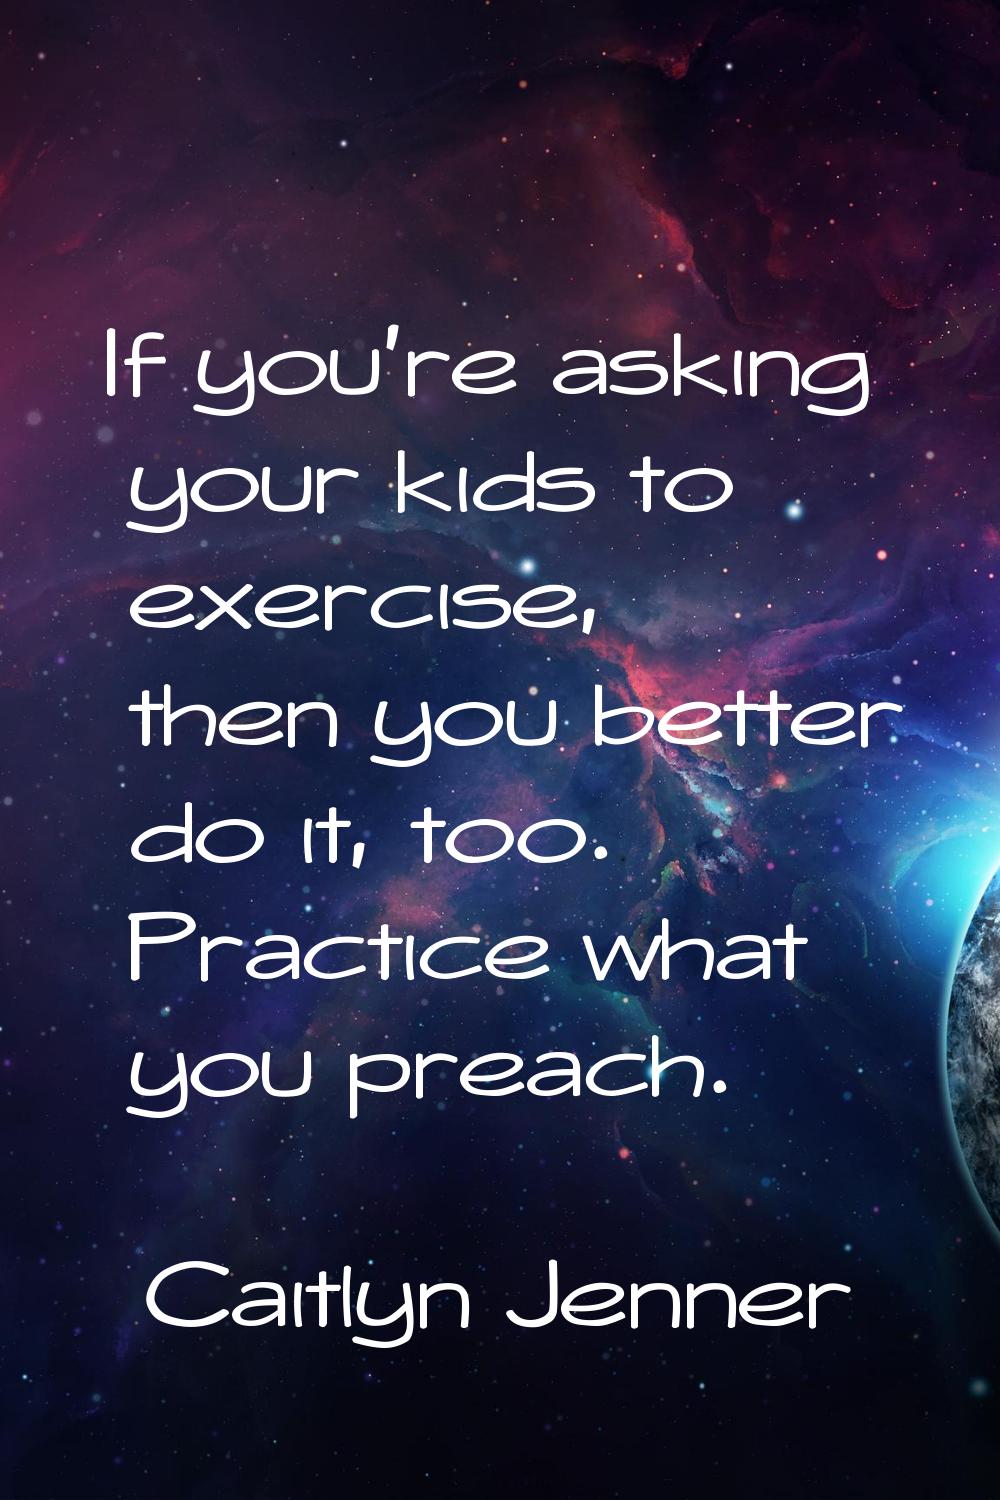 If you're asking your kids to exercise, then you better do it, too. Practice what you preach.